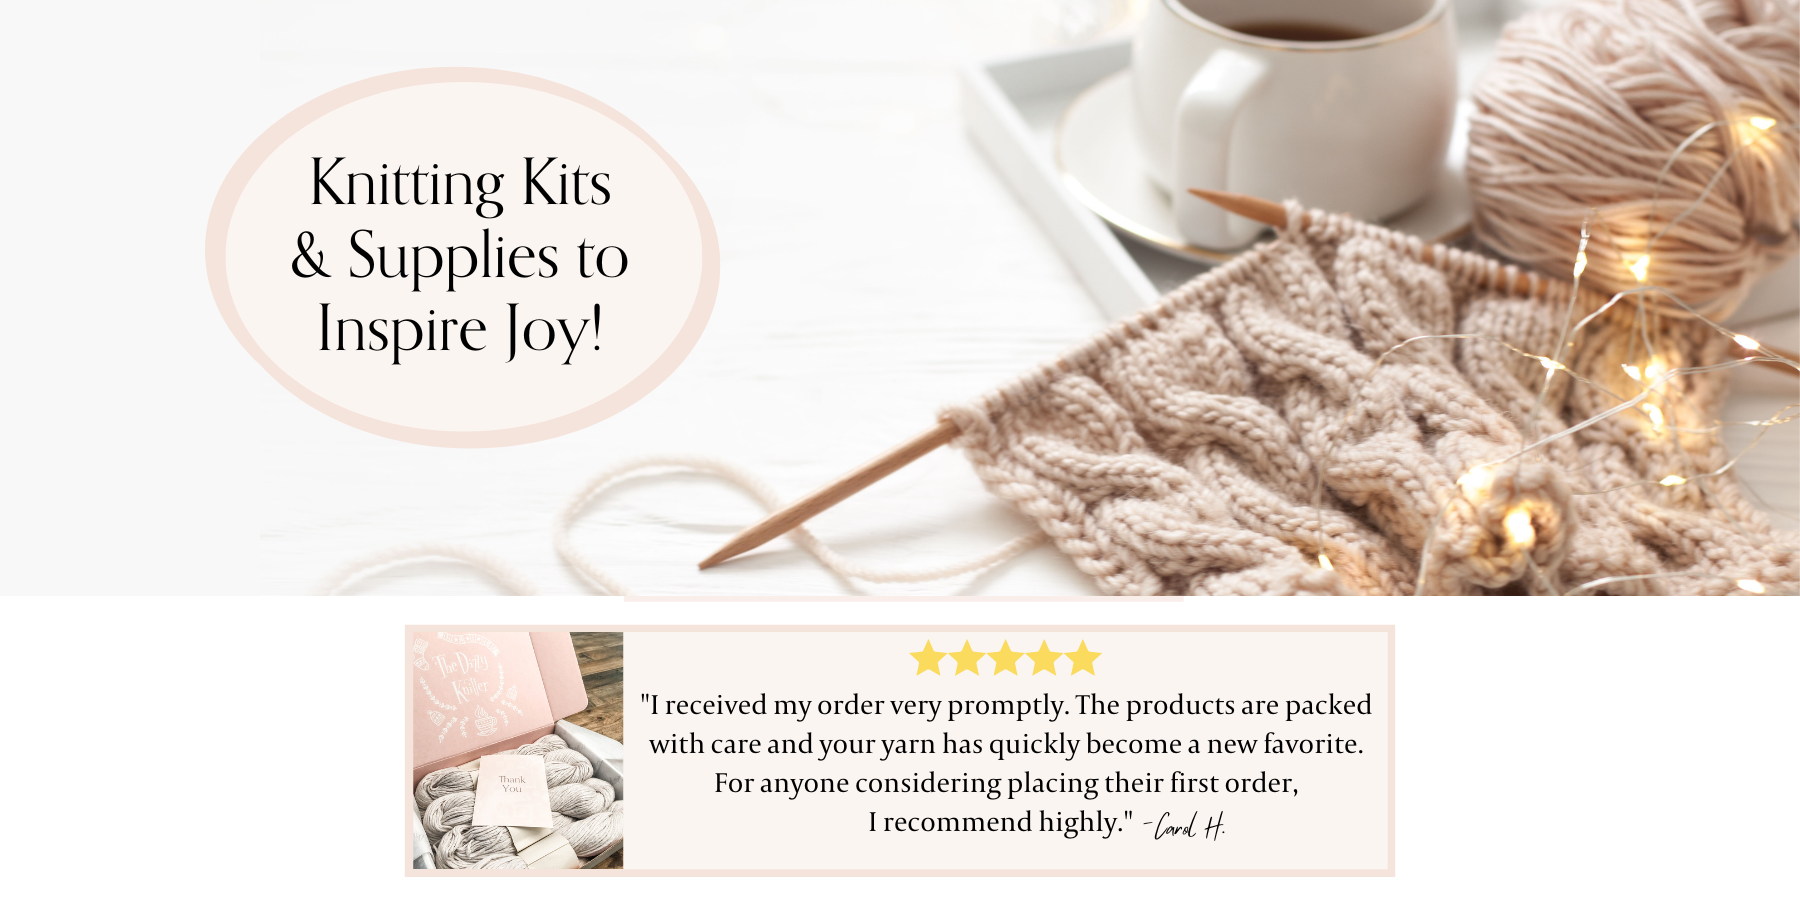 Knitting Kits & Supplies by The Dizzy Knitter